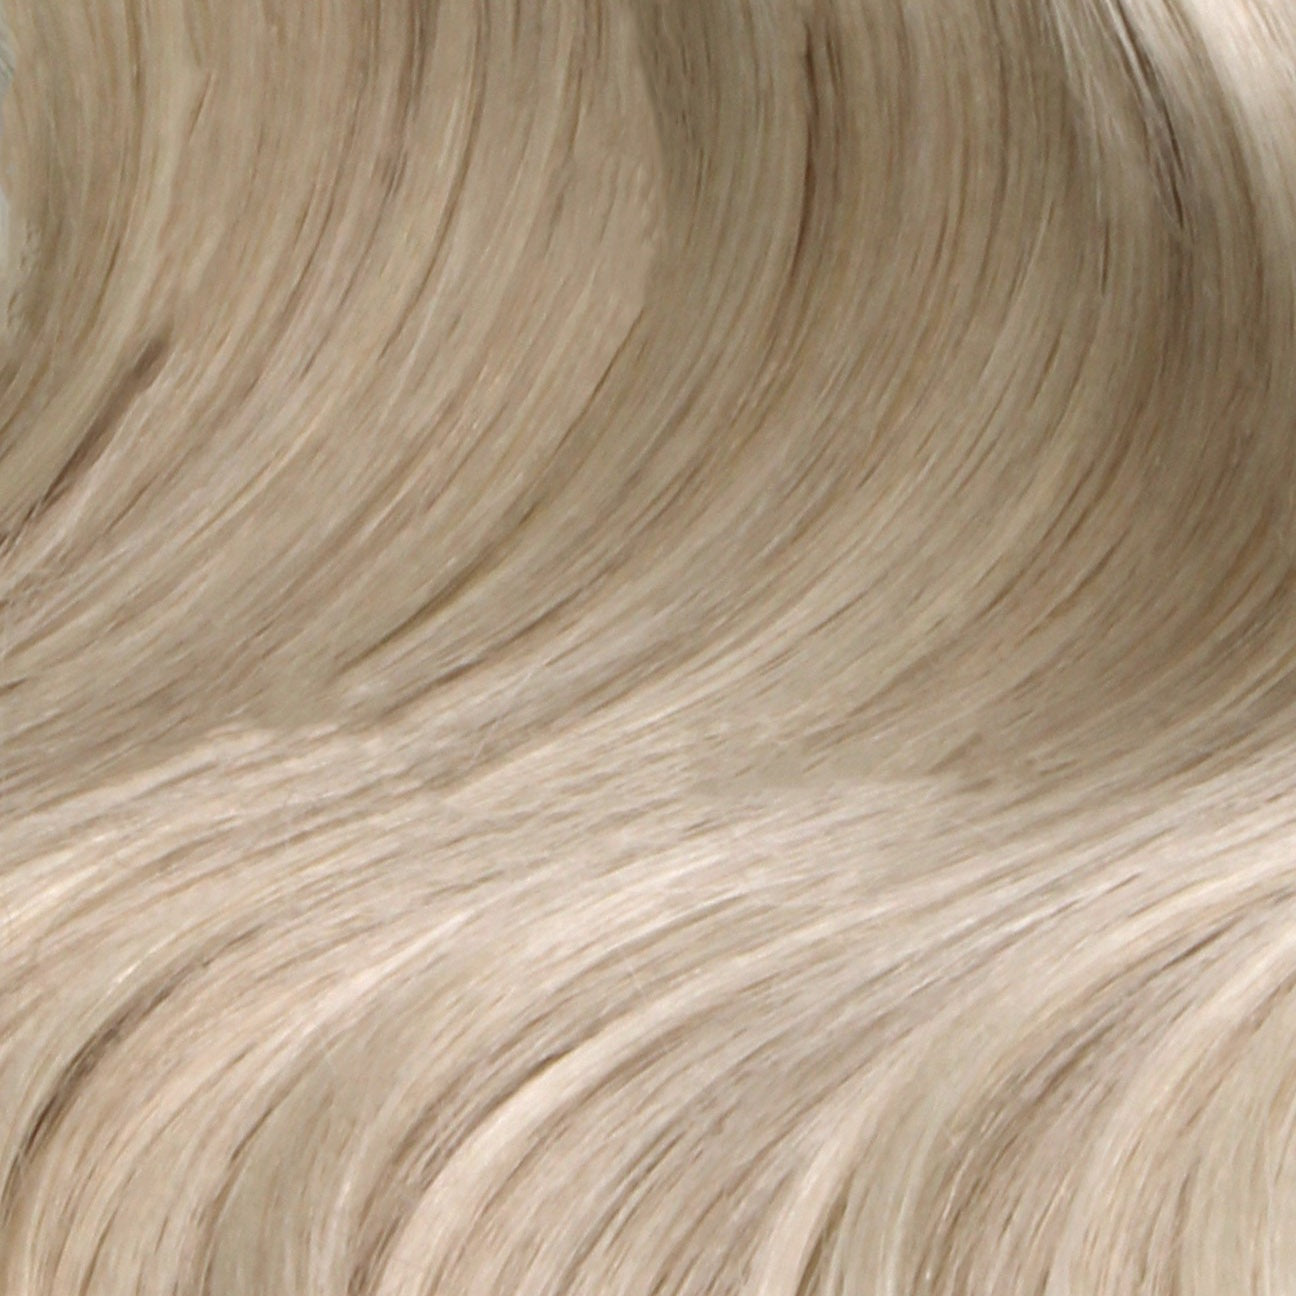 Nano Bonds 18 Inches - SWAY Hair Extensions Pearl-Blonde-66 Ultra-fine, invisible bonds for a flawless, natural look. 100% Remy Human hair, lightweight and versatile. Reusable and perfect for individual or salon use.